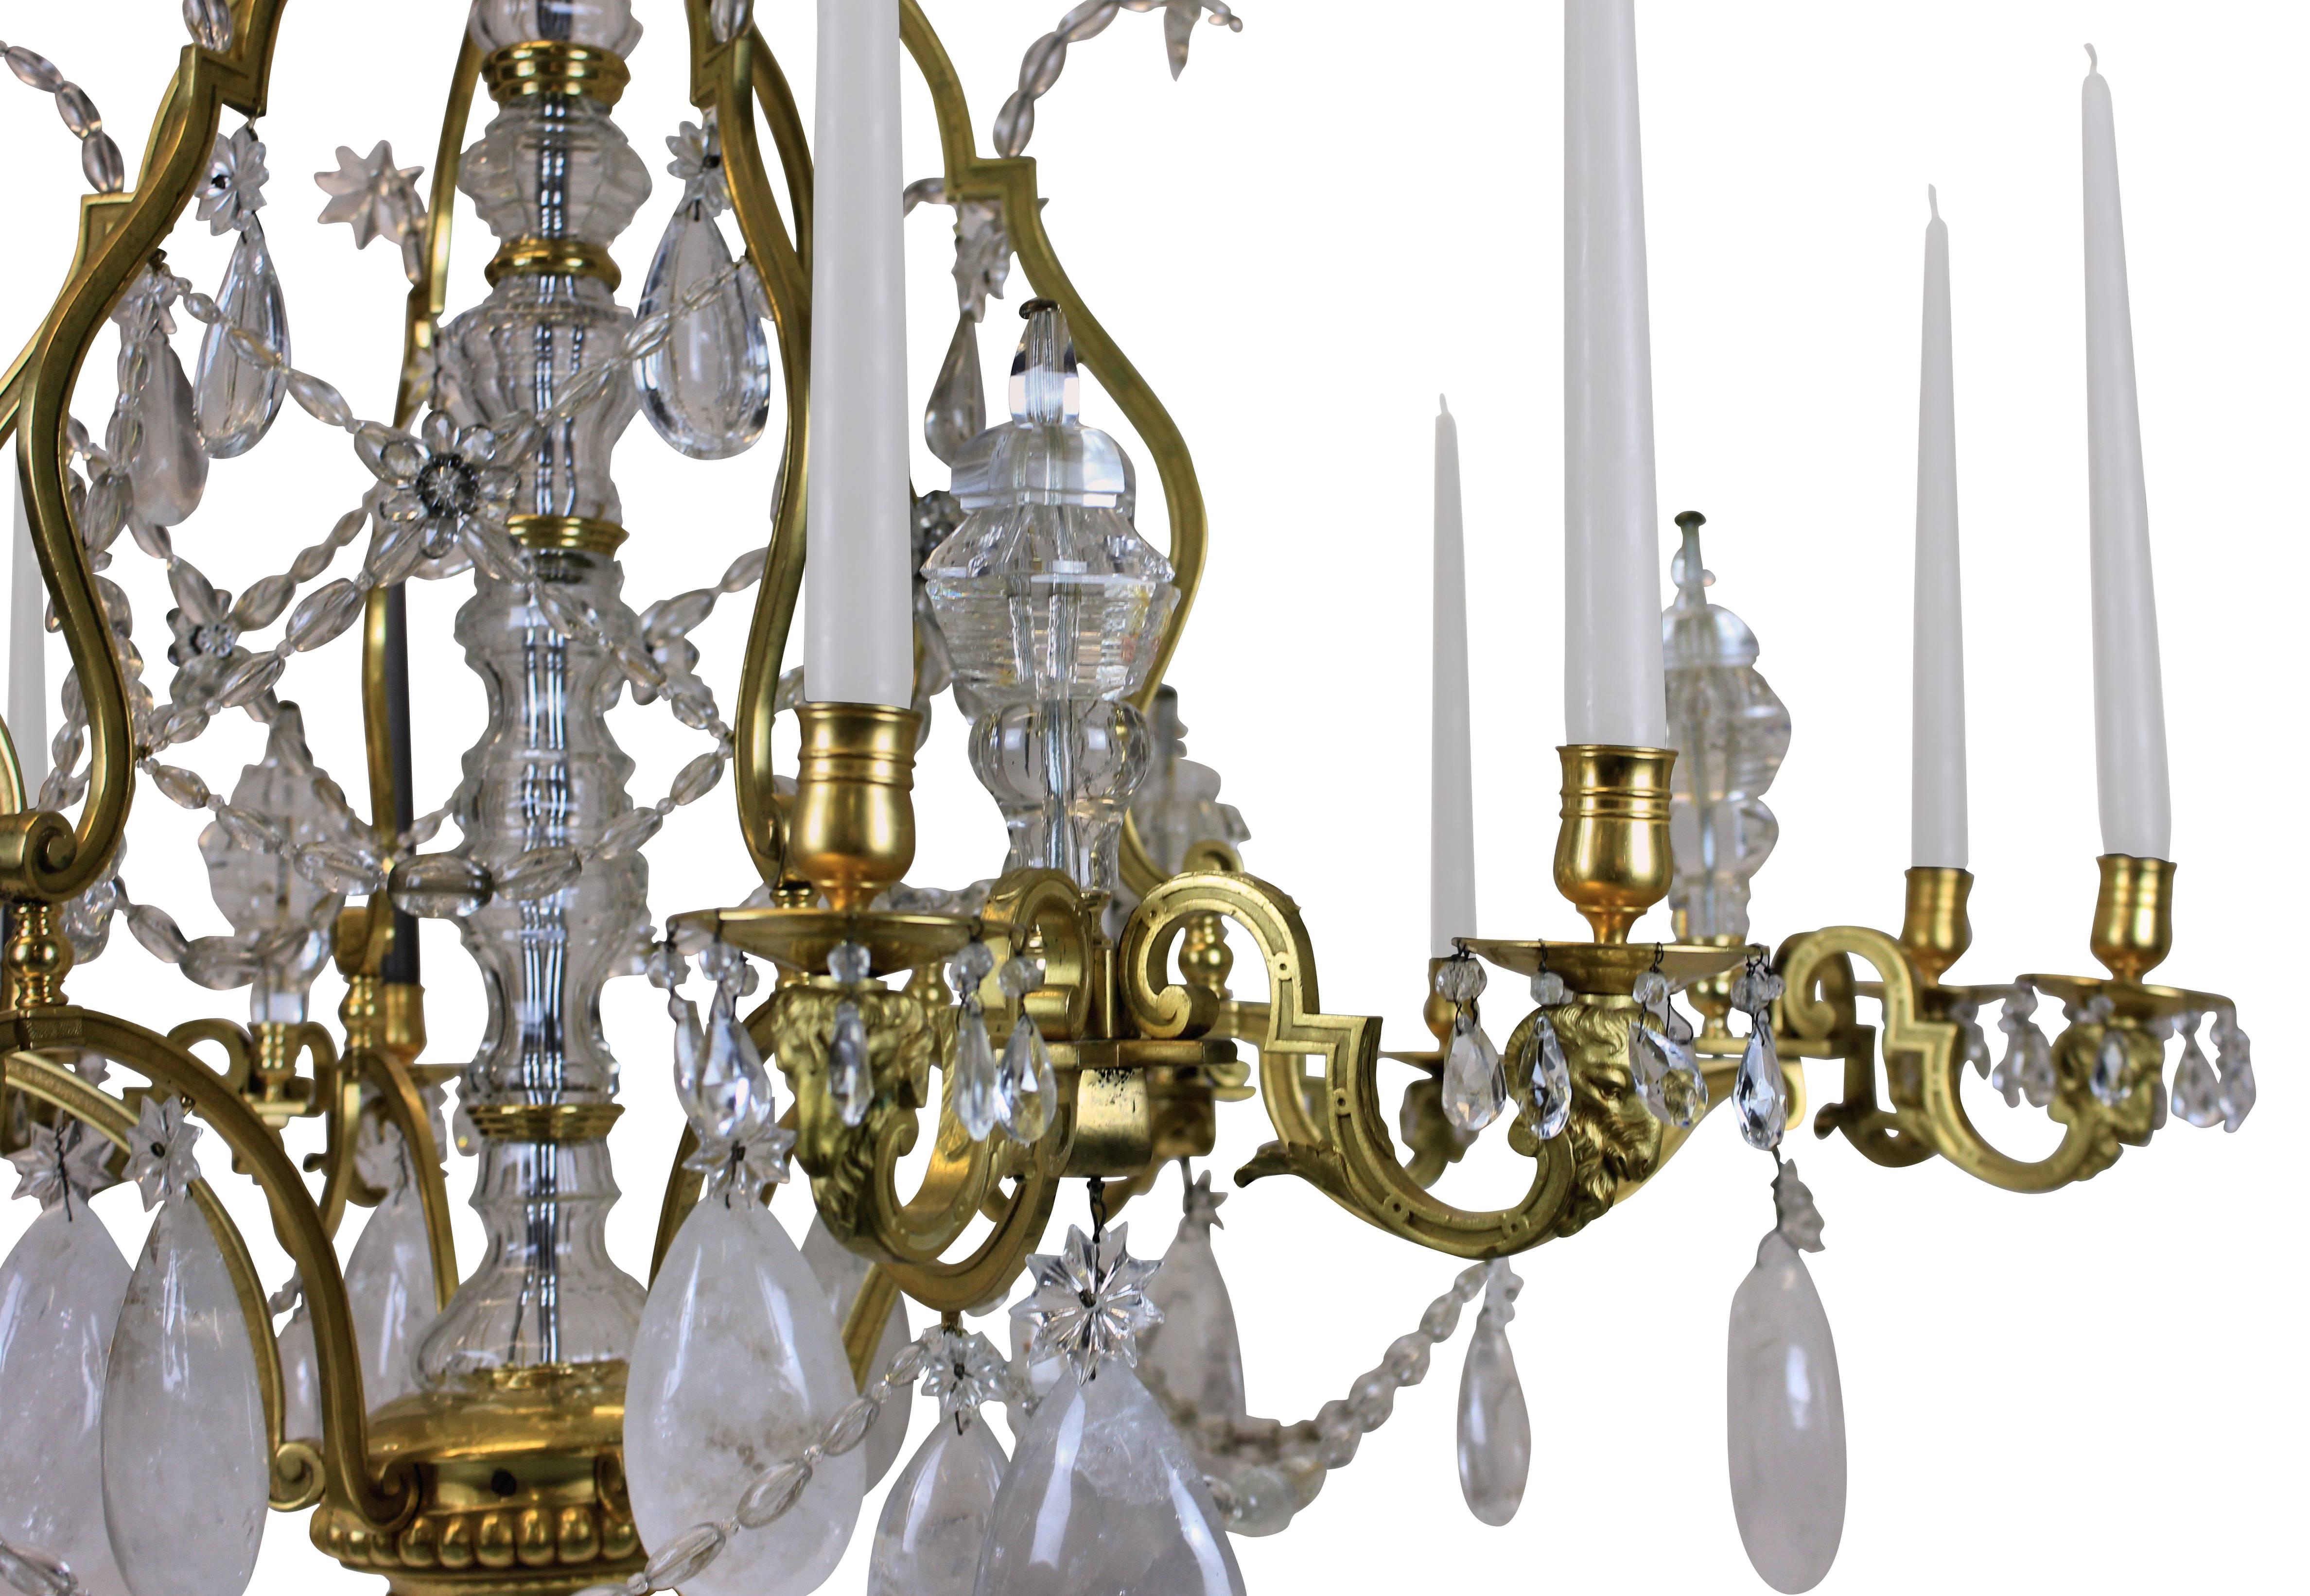 This Louis XIV chandelier is monumental in scale and is of the highest quality of mercury gilded bronze and hung with rock crystal. Of superb proportions and detail. With ram's head decoration to each arm, of which there are twelve in total, with